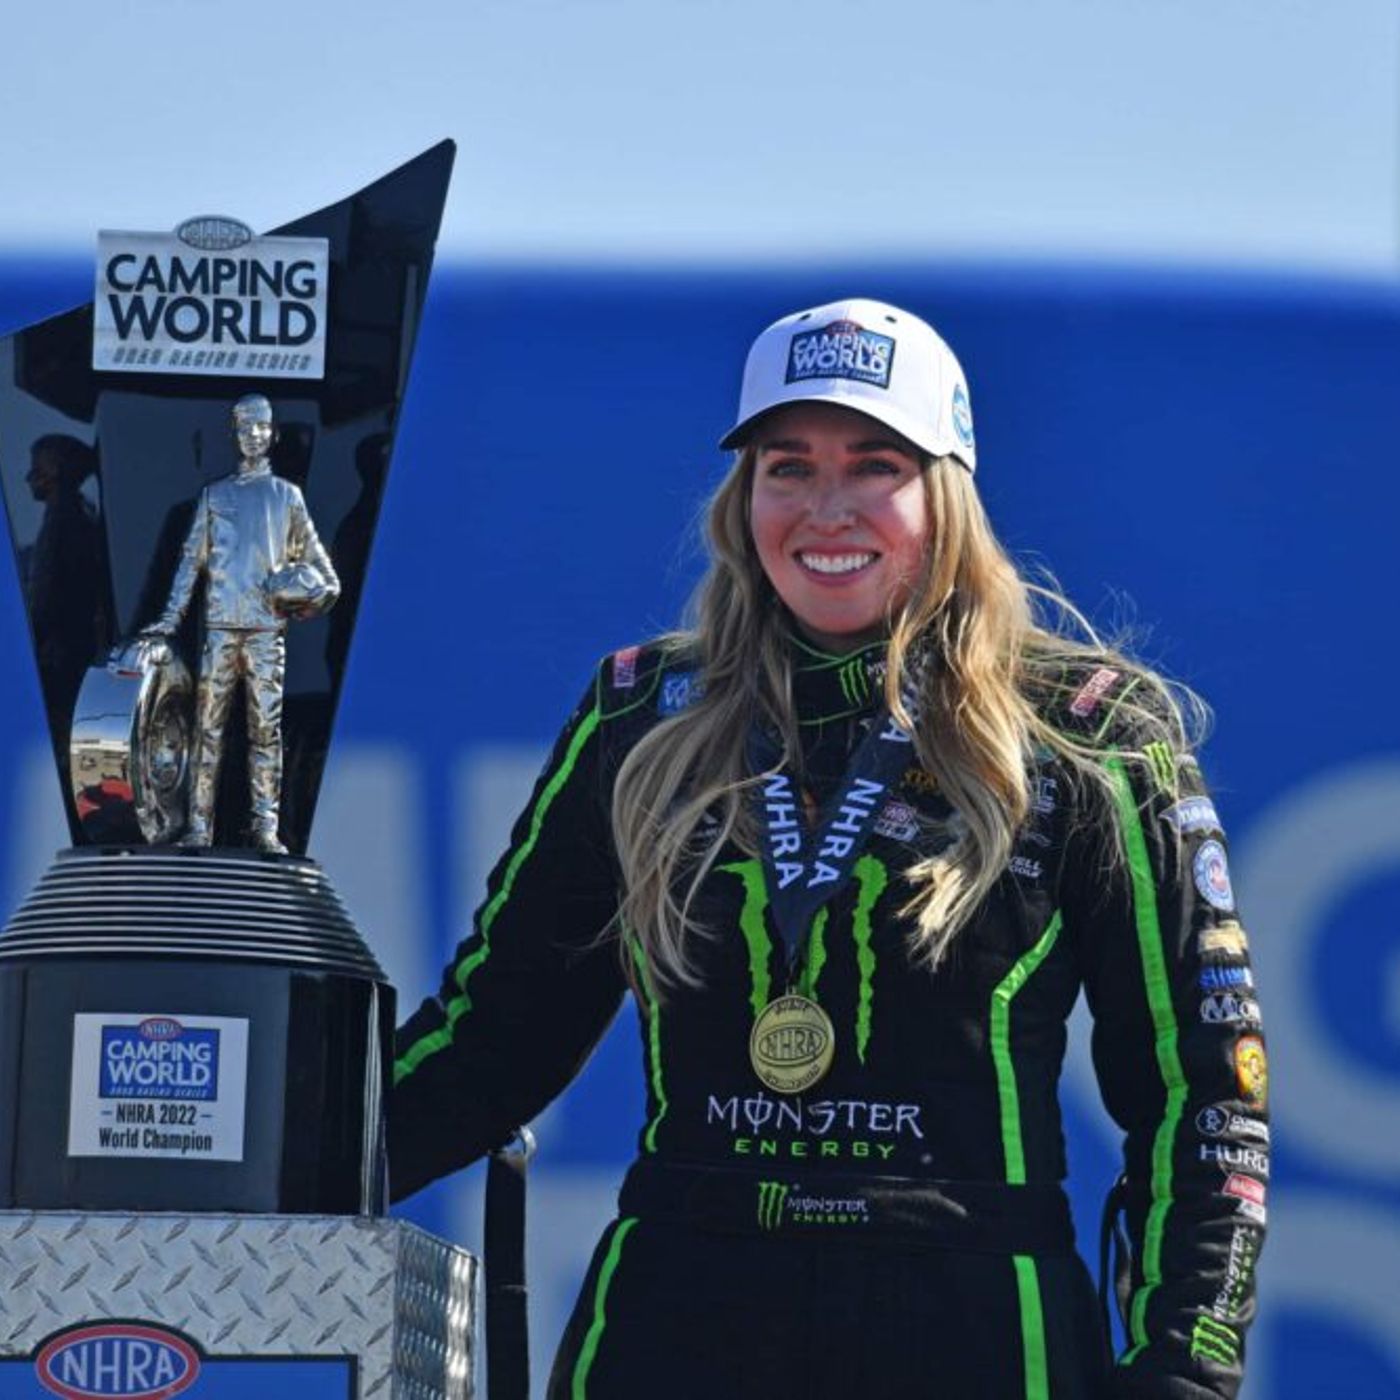 NHRA: 2022 Top Fuel World Champ Brittany Force